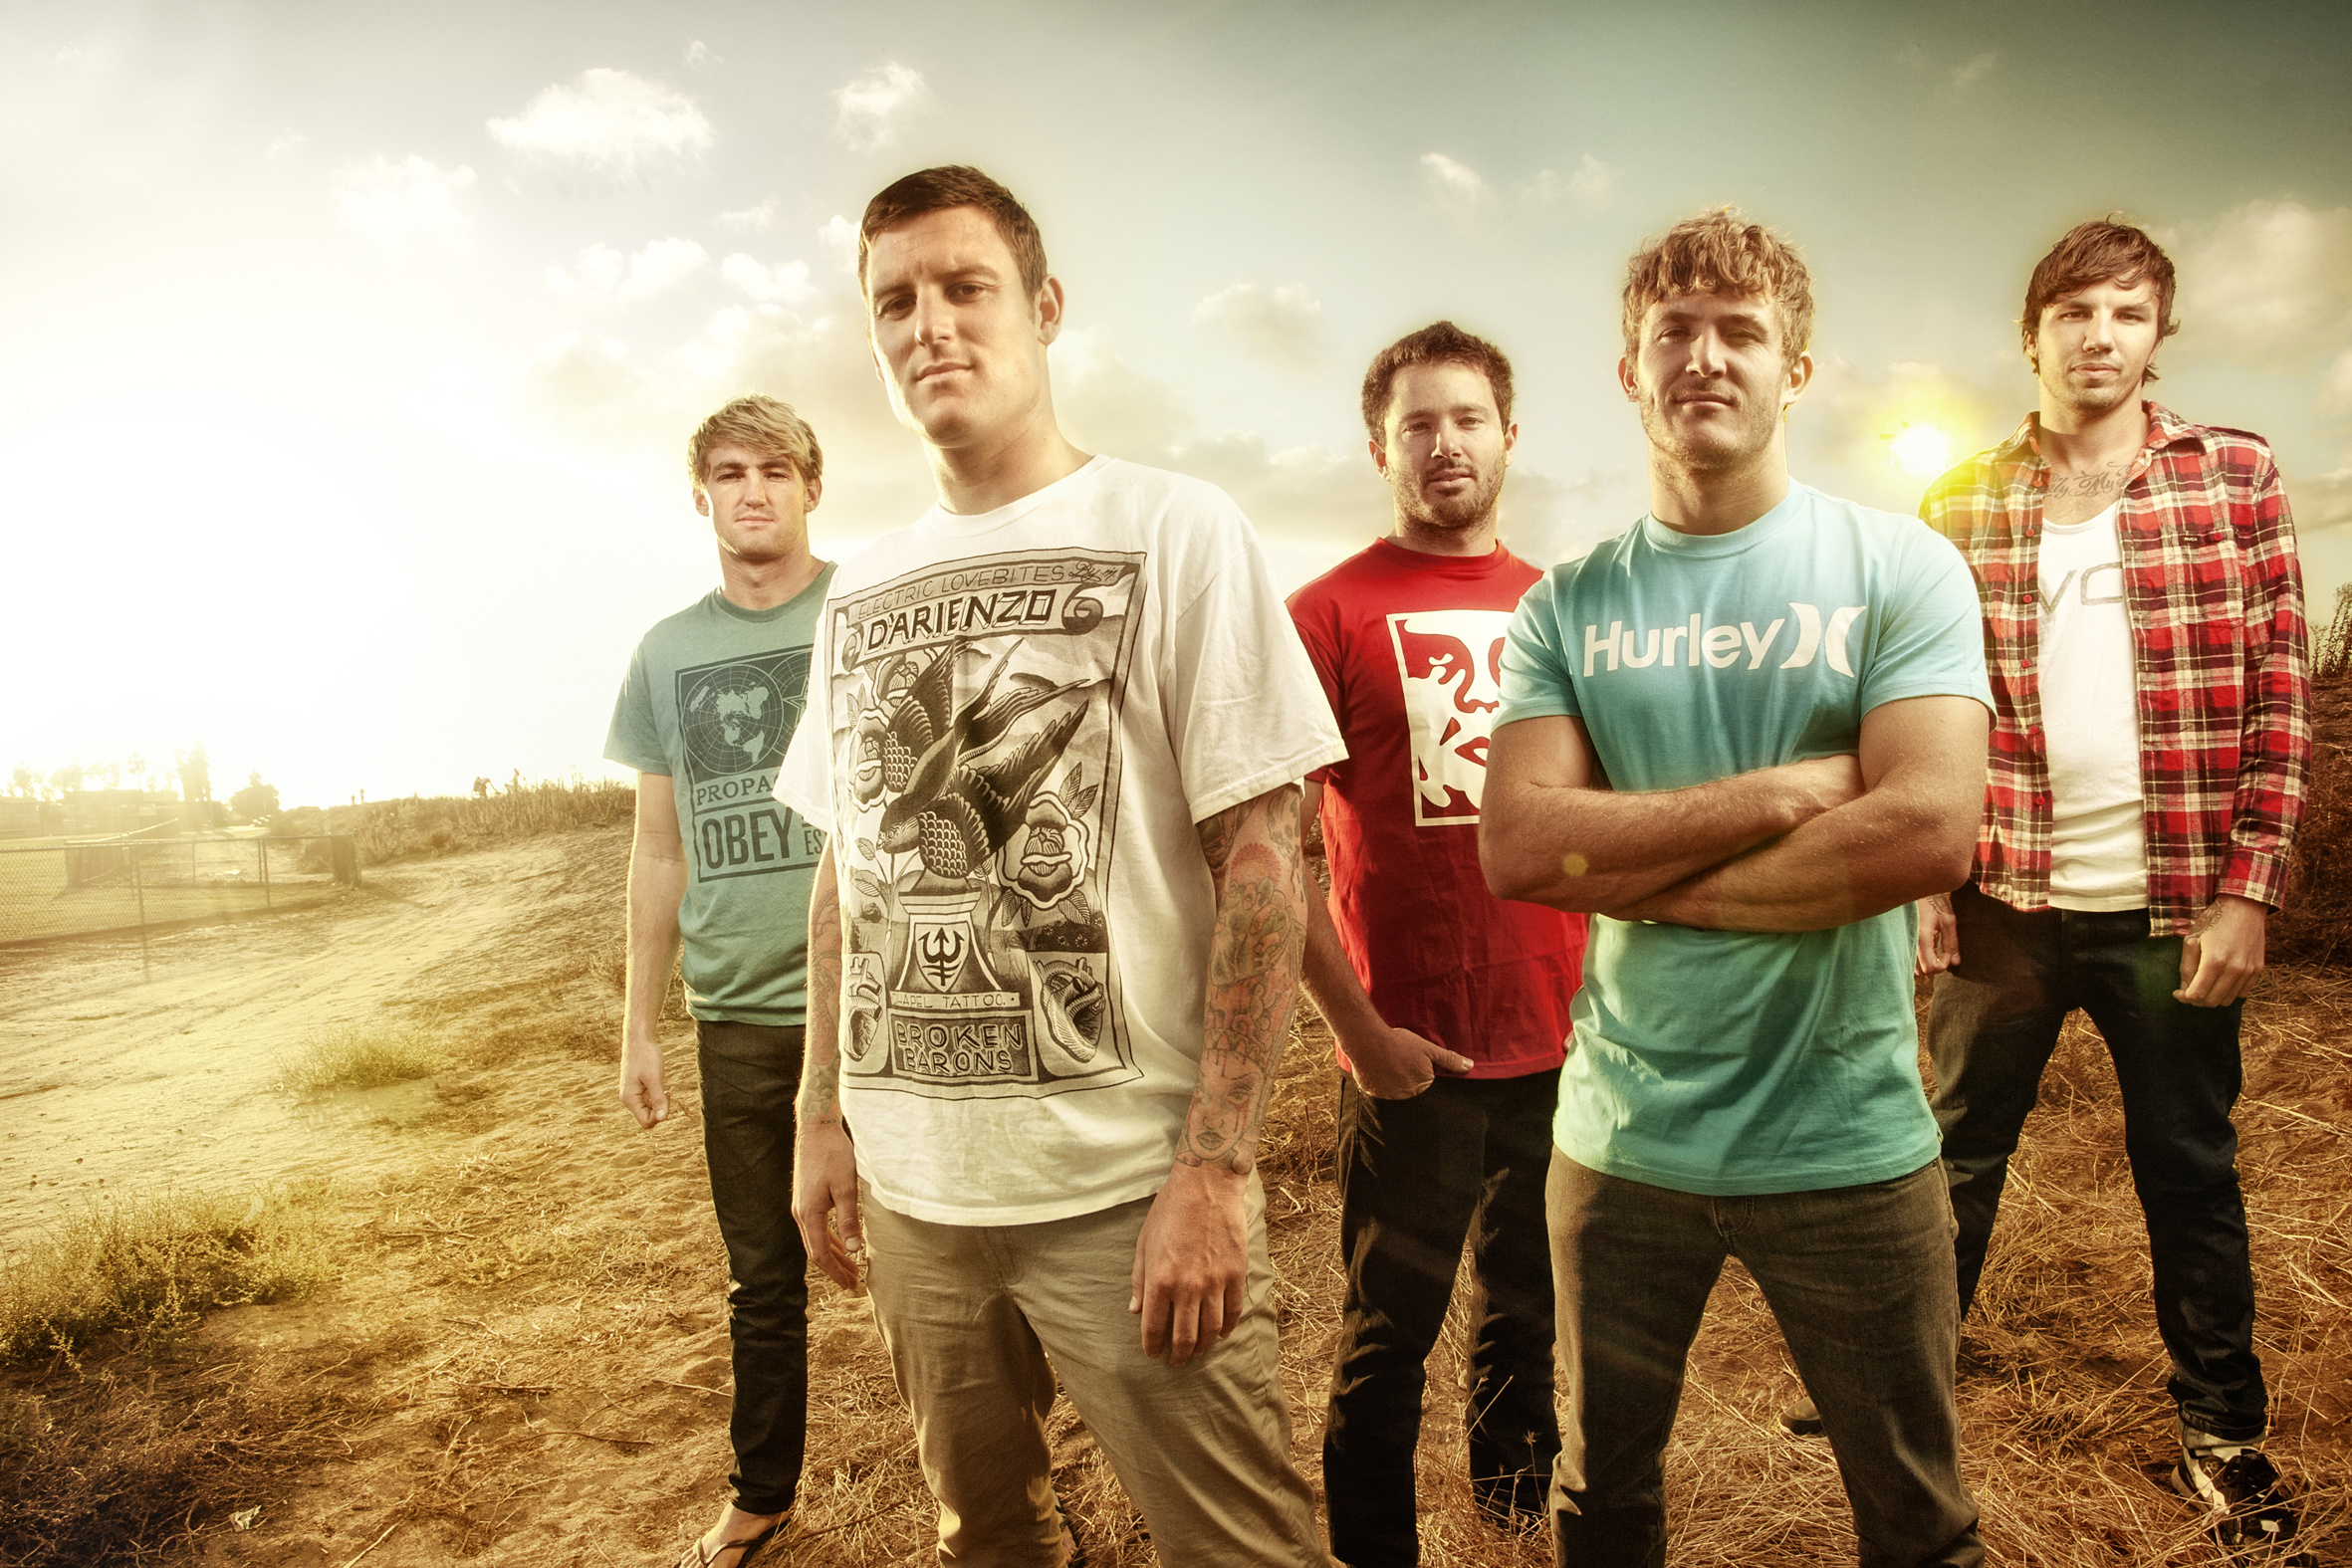 Parkway Drive, Music wallpapers, HQ pictures, 2019 4K images, 2370x1580 HD Desktop